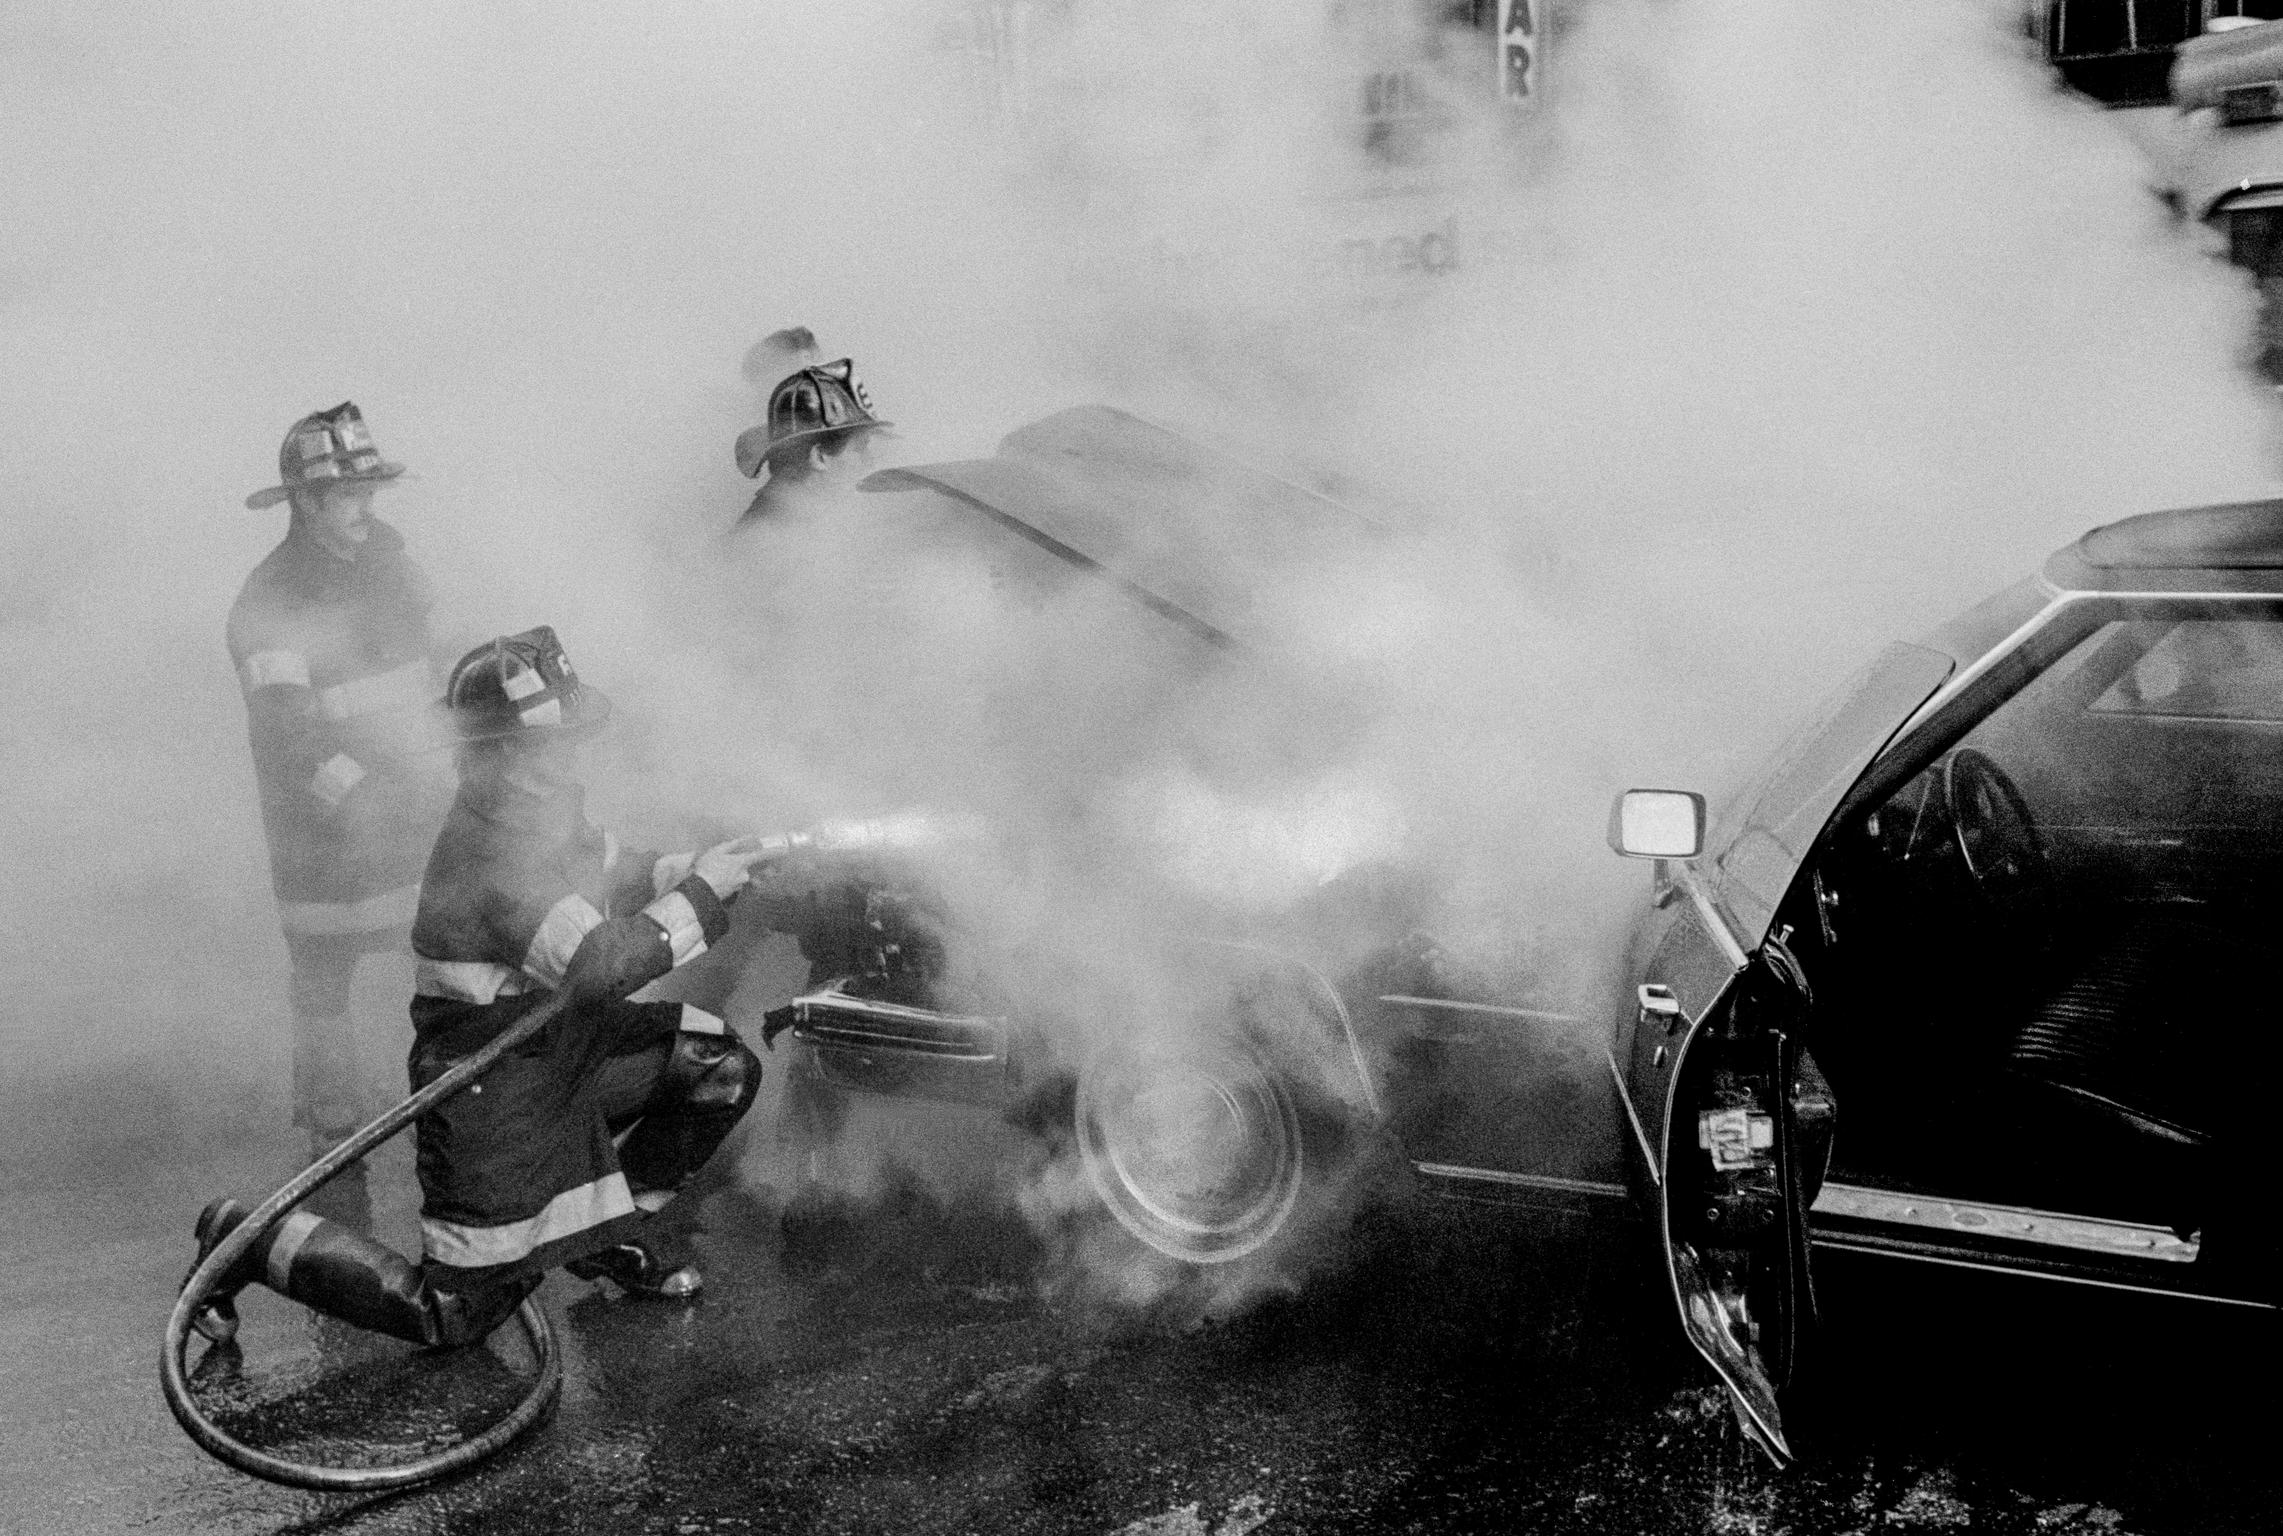 Car accident in the street. Firefighters come to the rescue. New York, USA